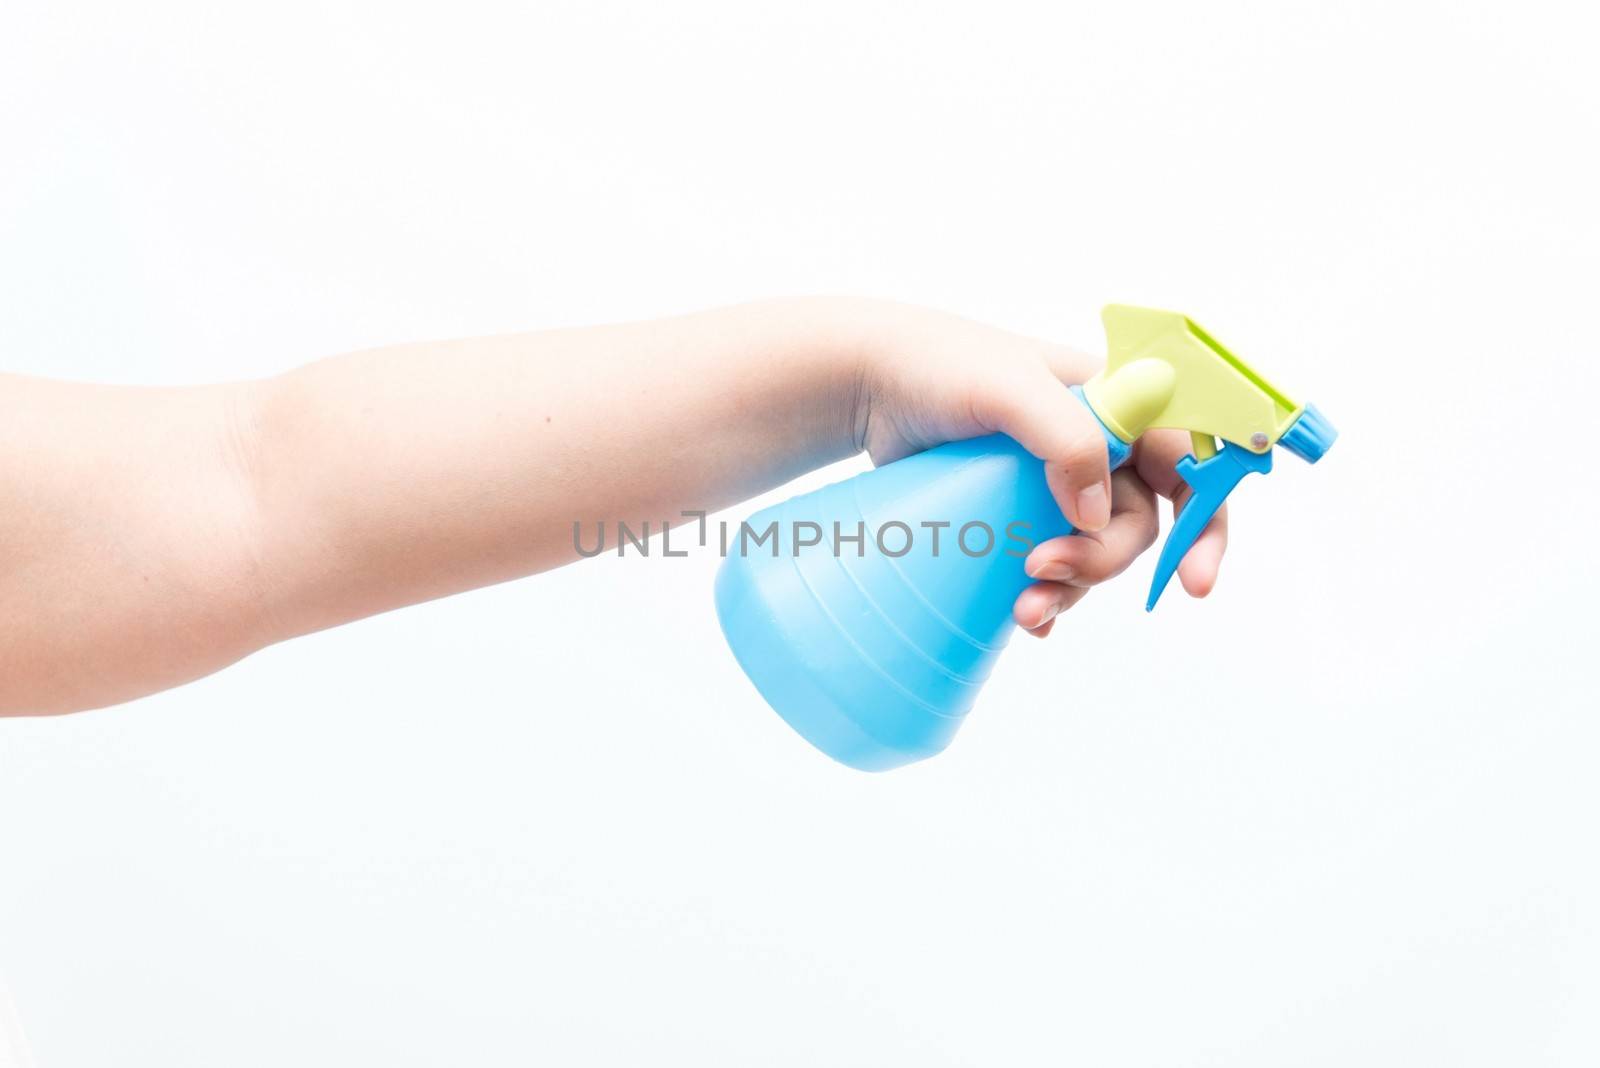 Asian woman holding a water sprayer for ironing by sasilsolutions